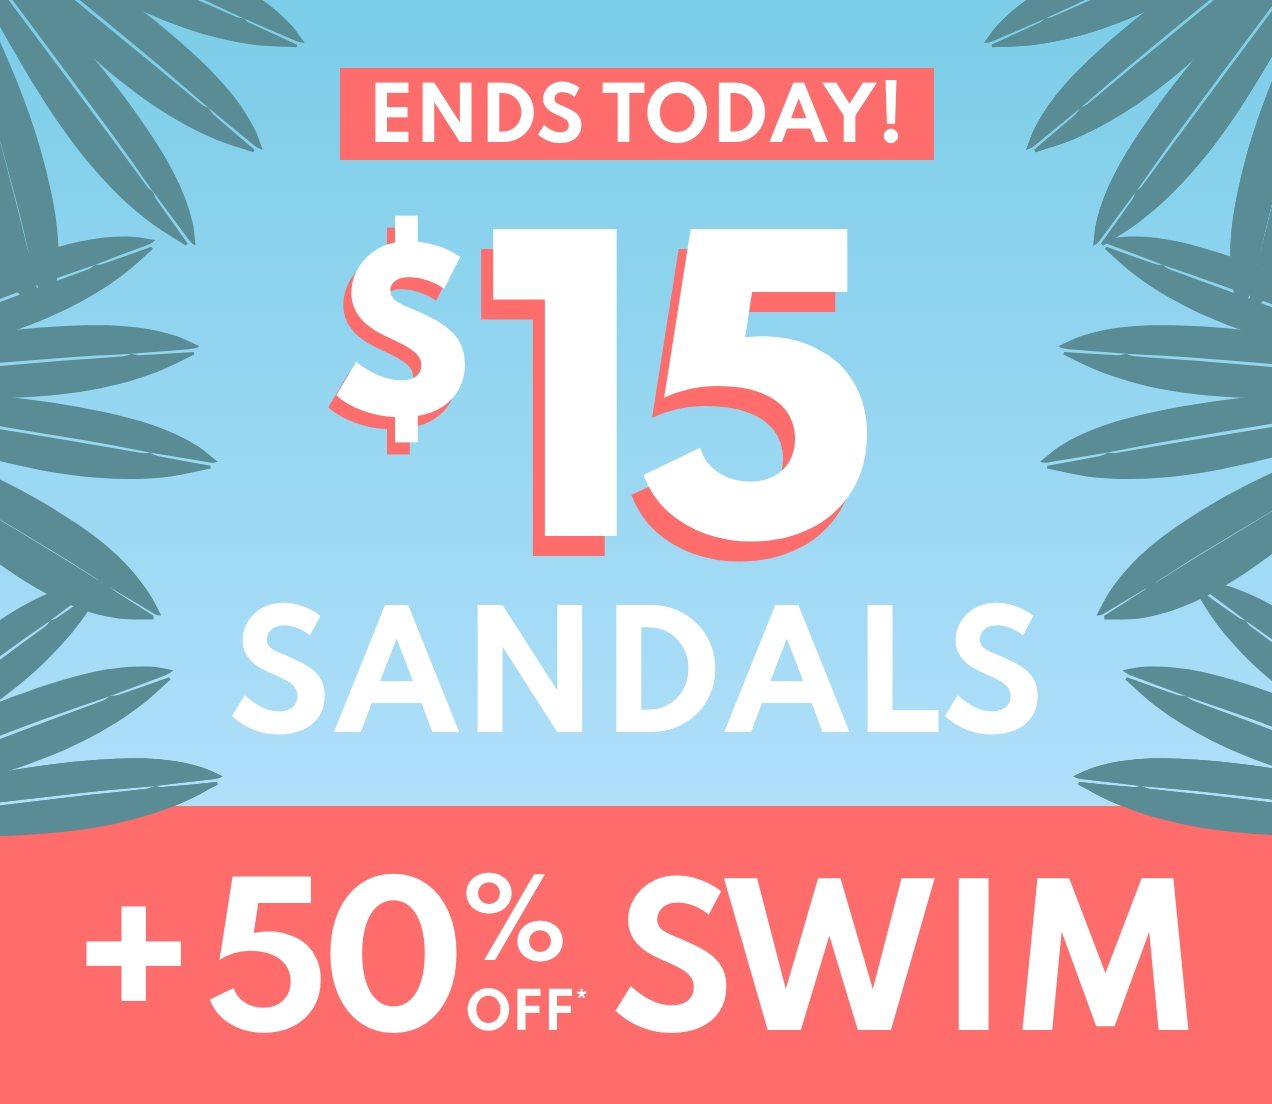 ENDS TODAY! | $15 SANDALS +50% OFF* SWIM 